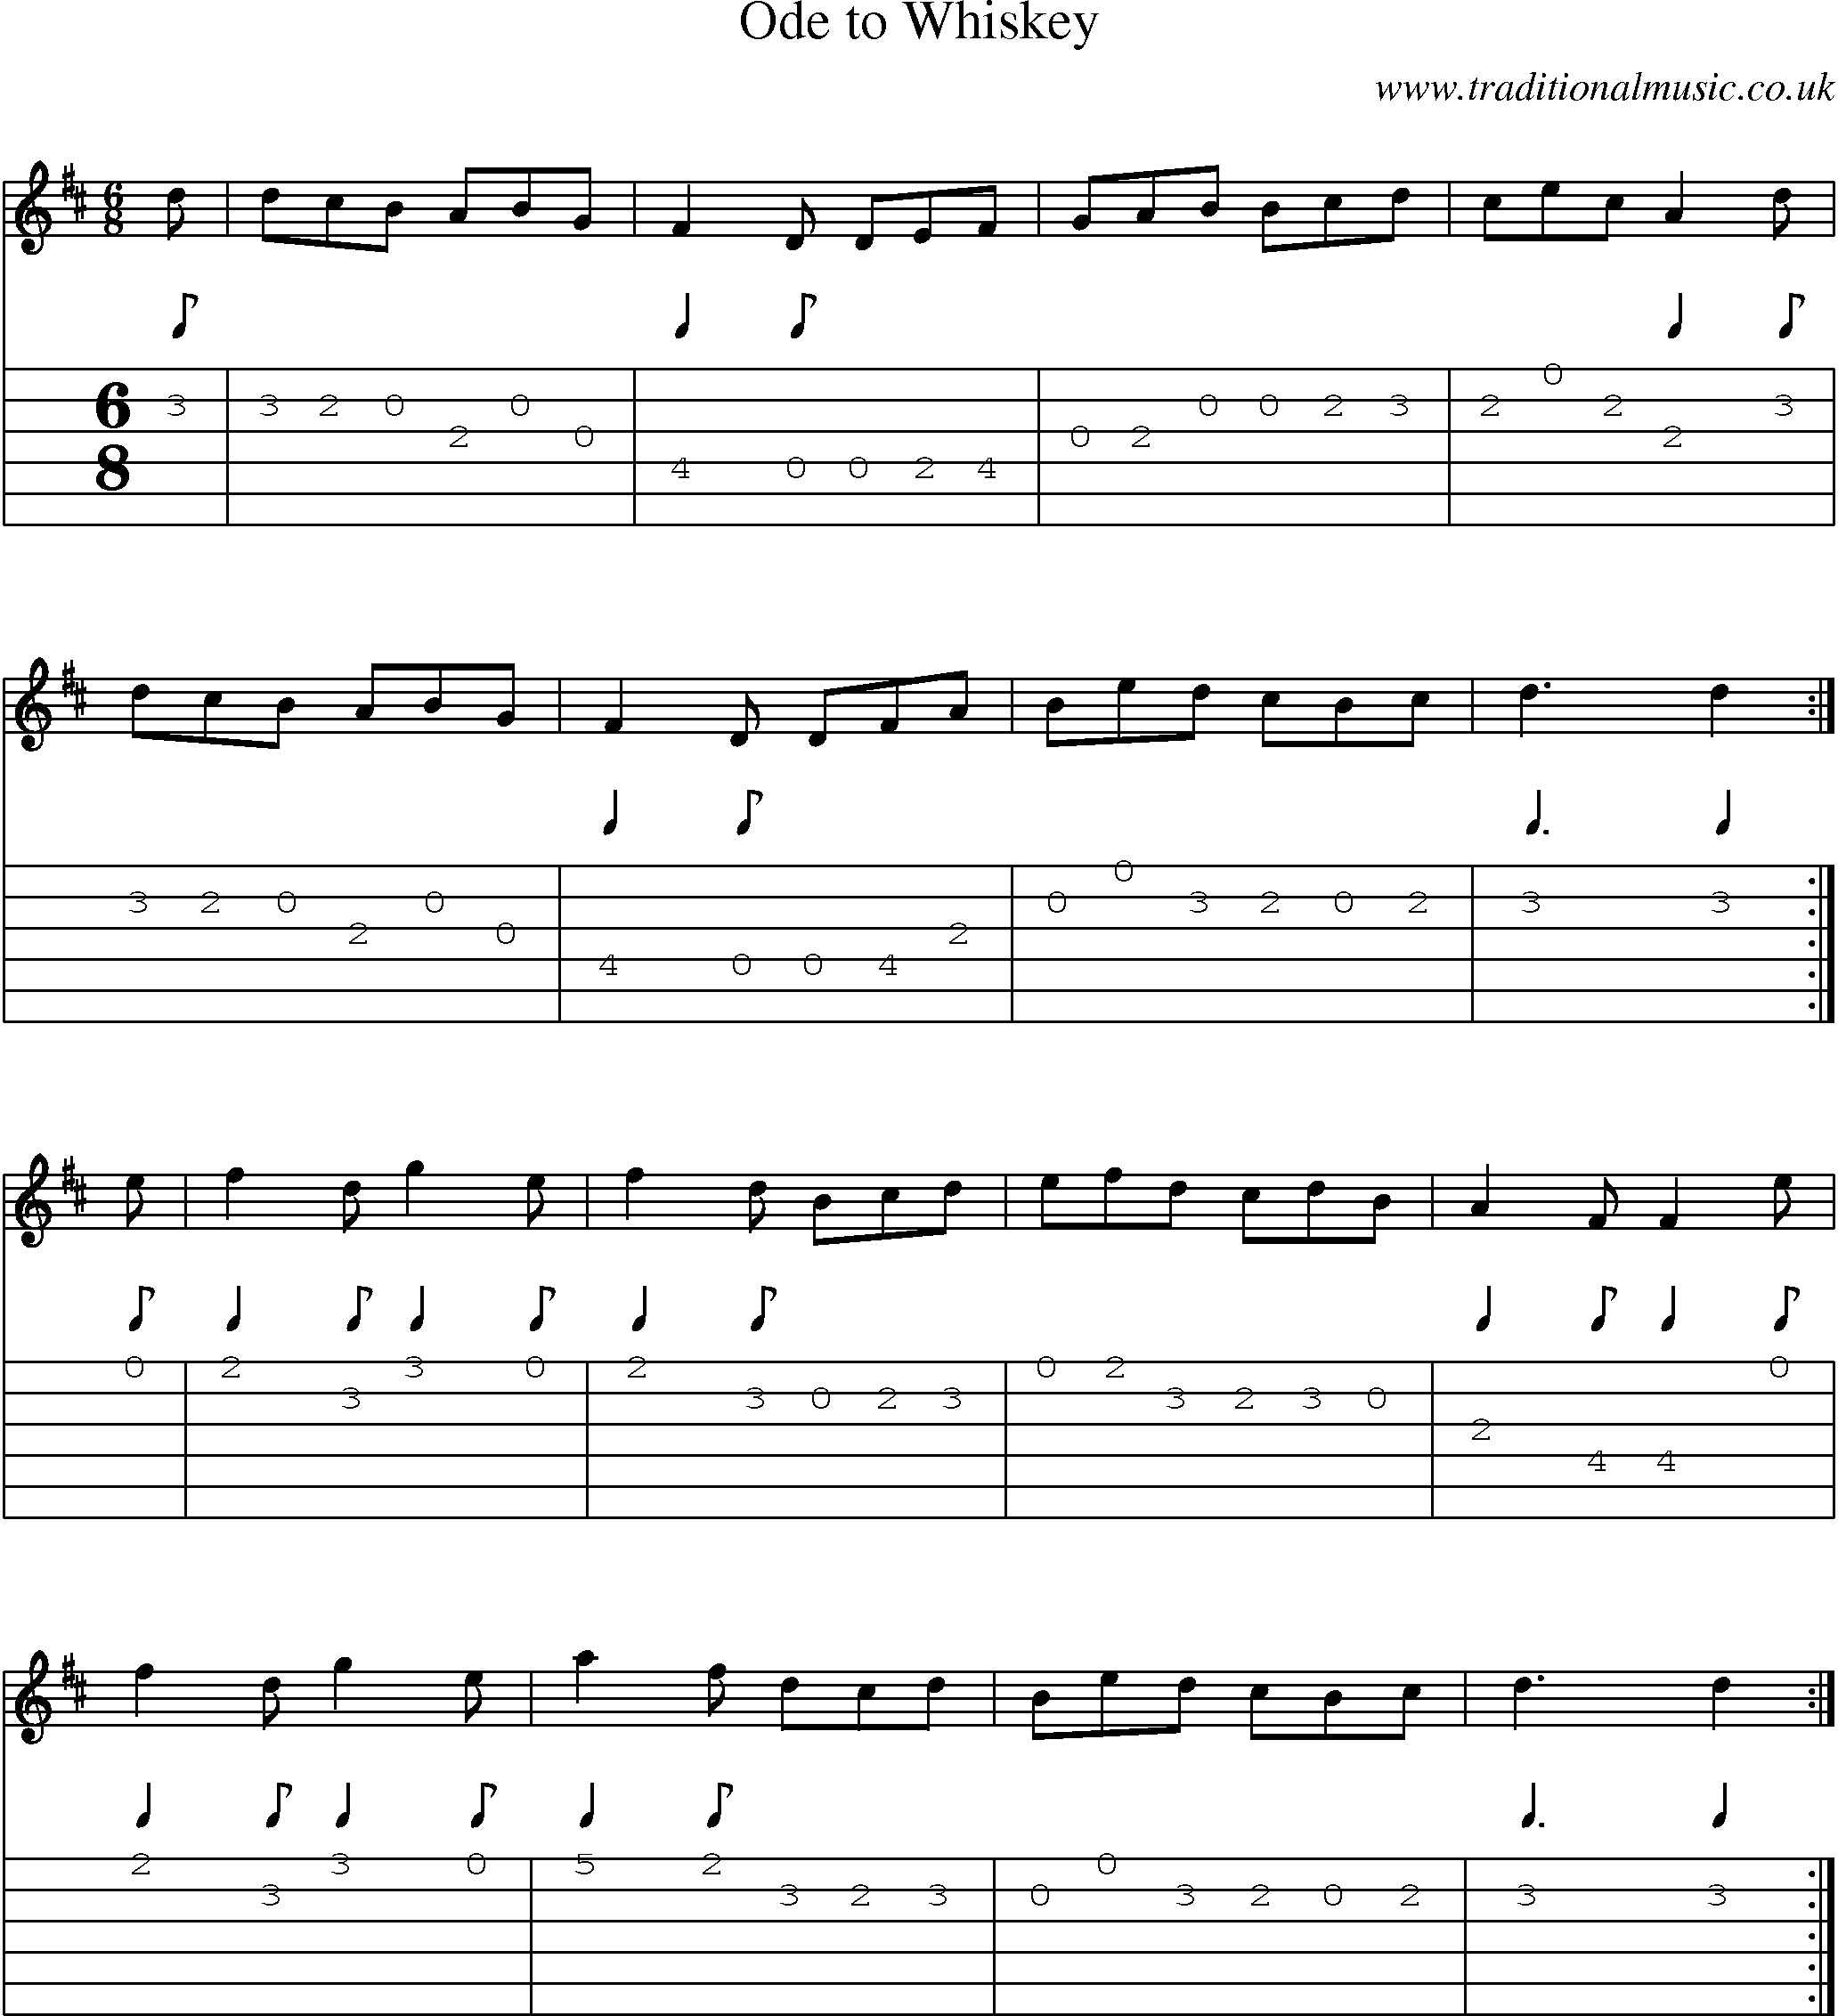 Music Score and Guitar Tabs for Ode To Whiskey